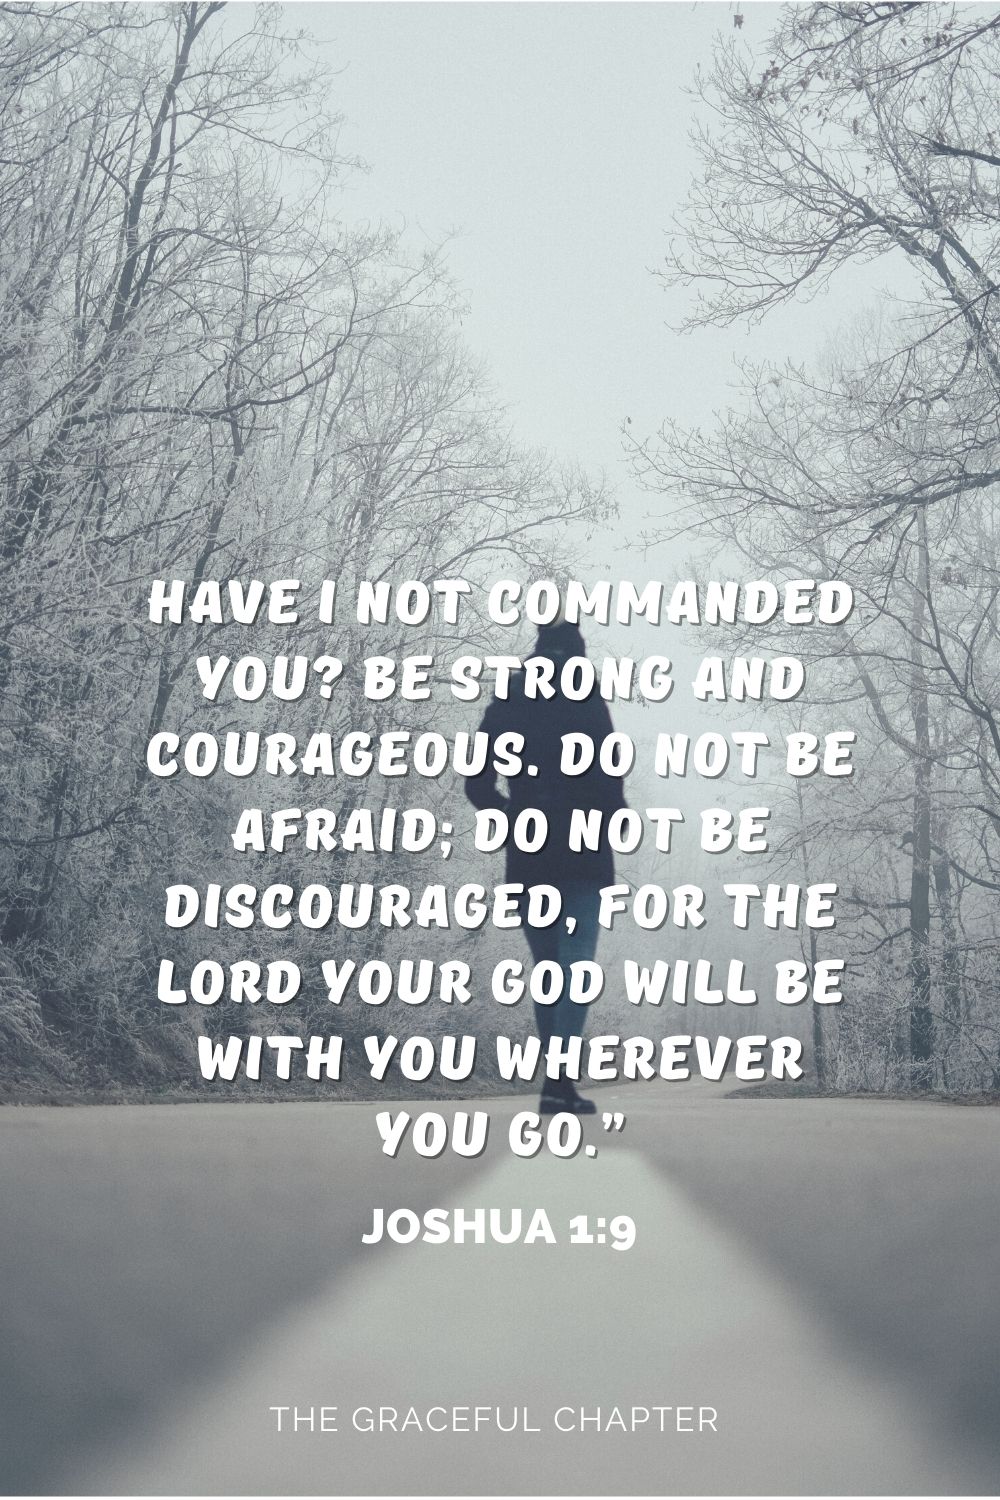 Have I not commanded you? Be strong and courageous. Do not be afraid; do not be discouraged, for the Lord your God will be with you wherever you go.” Have I not commanded you? Be strong and courageous. Do not be afraid; do not be discouraged, for the Lord your God will be with you wherever you go.” Joshua 1:9